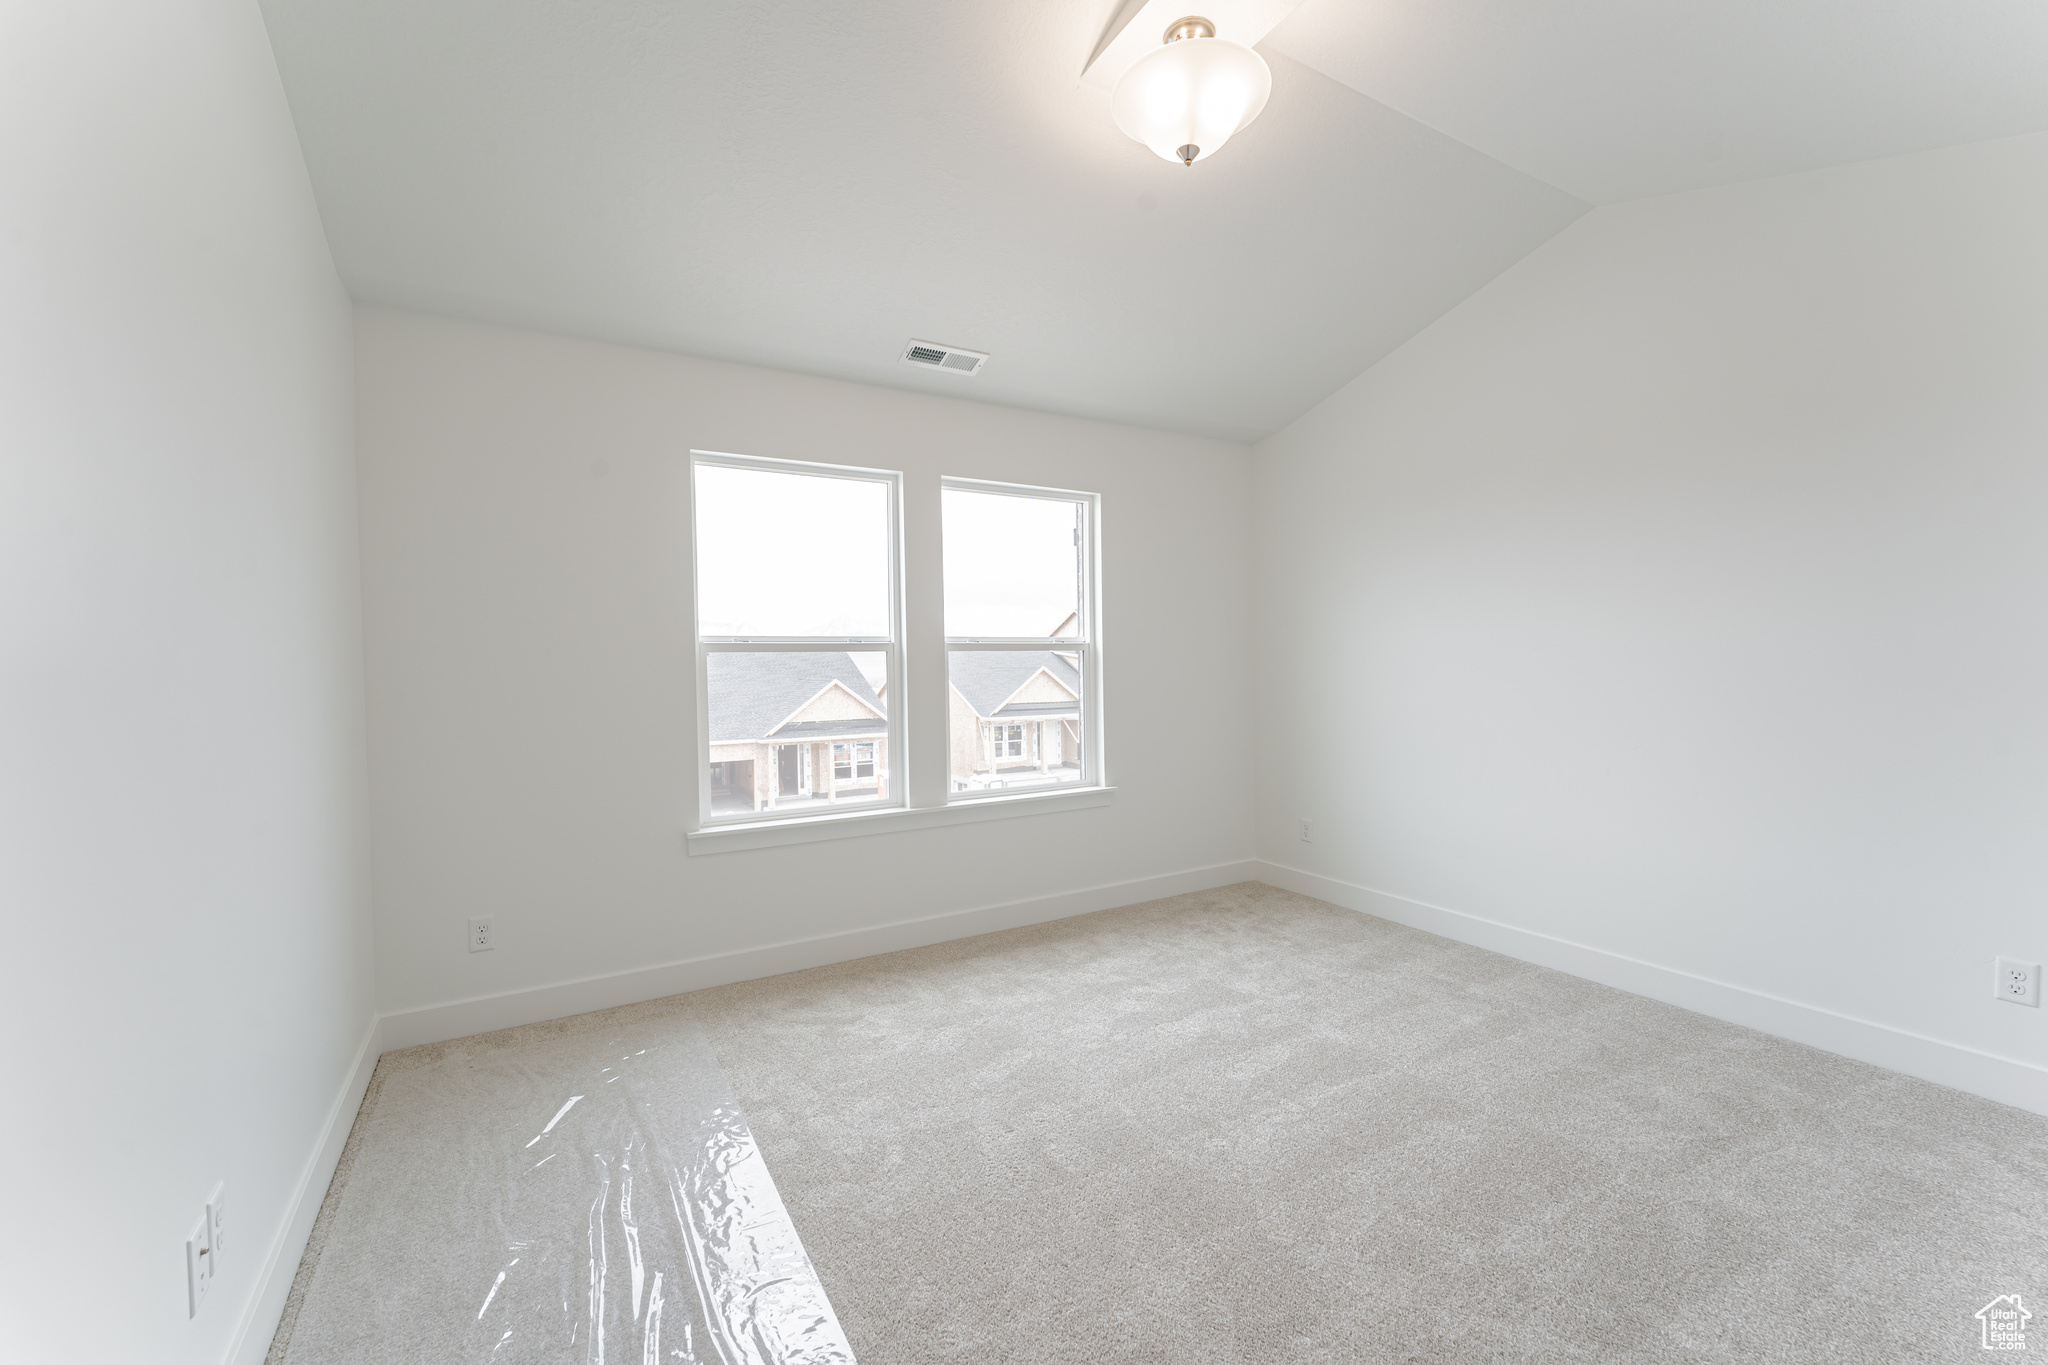 Empty room with light carpet and vaulted ceiling